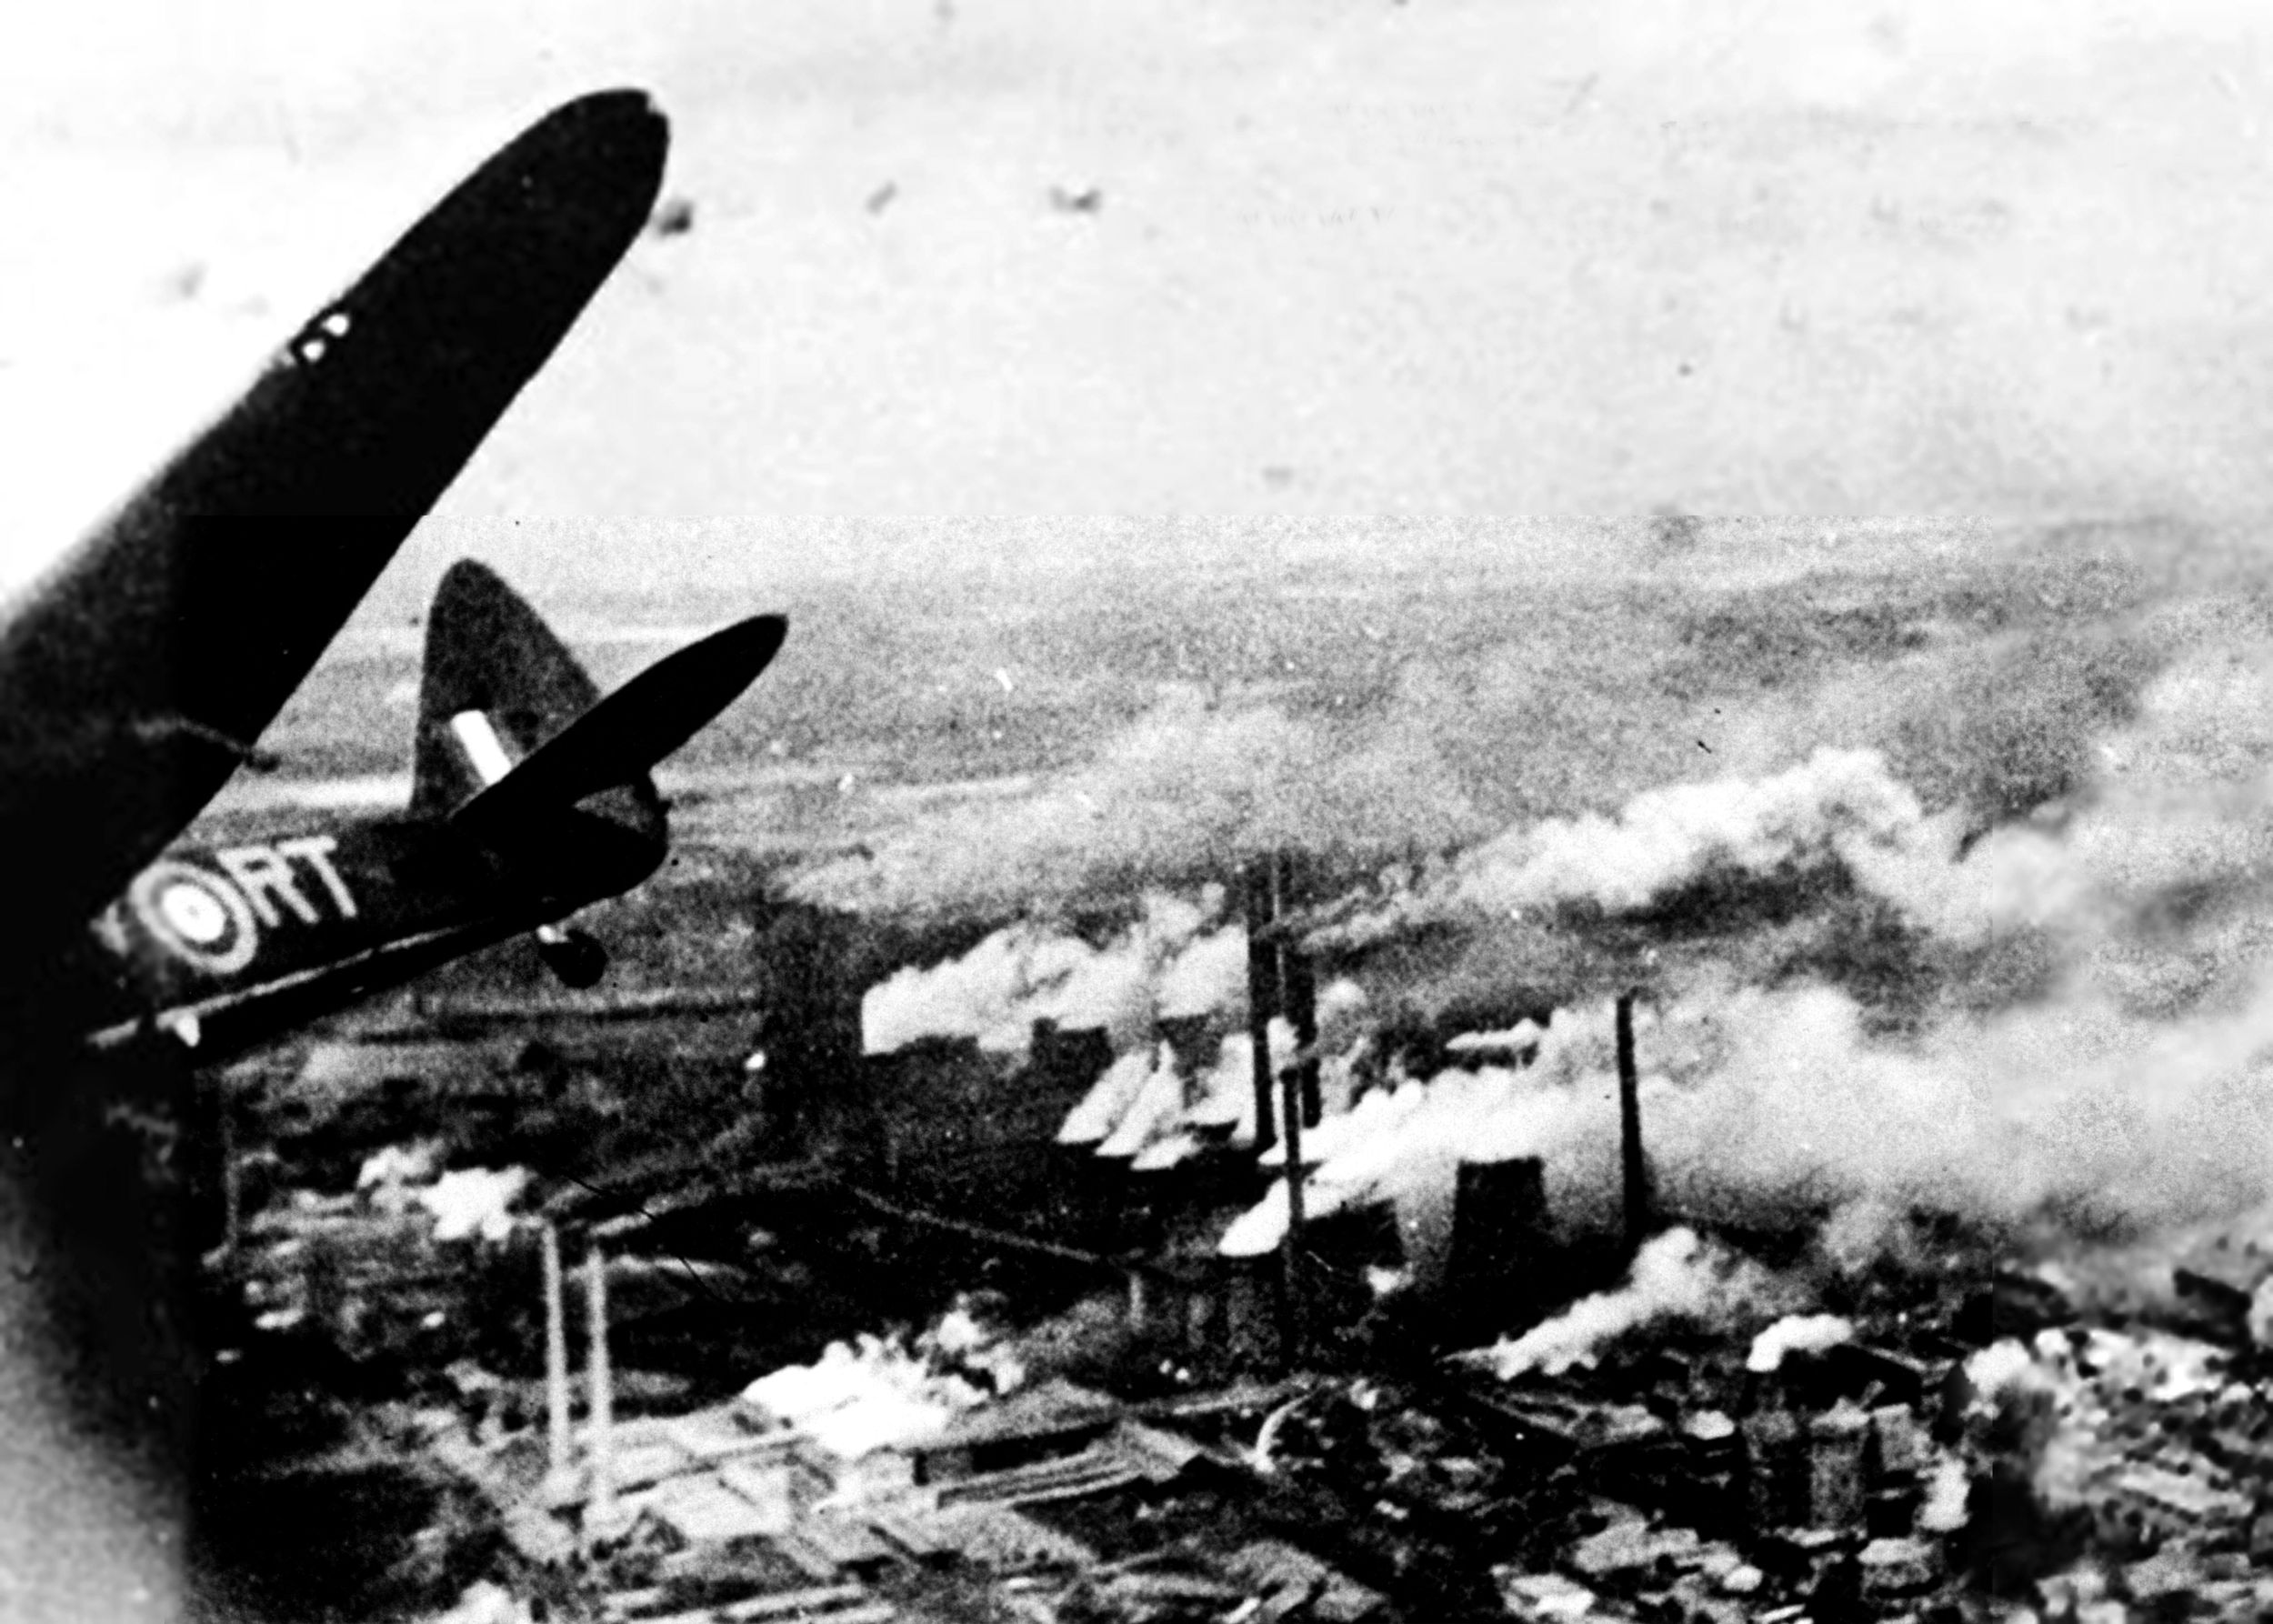 An RAF Bristol Blenheim IV bomber banks sharply away from the city's Goldenburg power station during a daylight raid on August 12, 1941. A total of 262 Allied air raids struck the city of Cologne, Germany, during World War II.